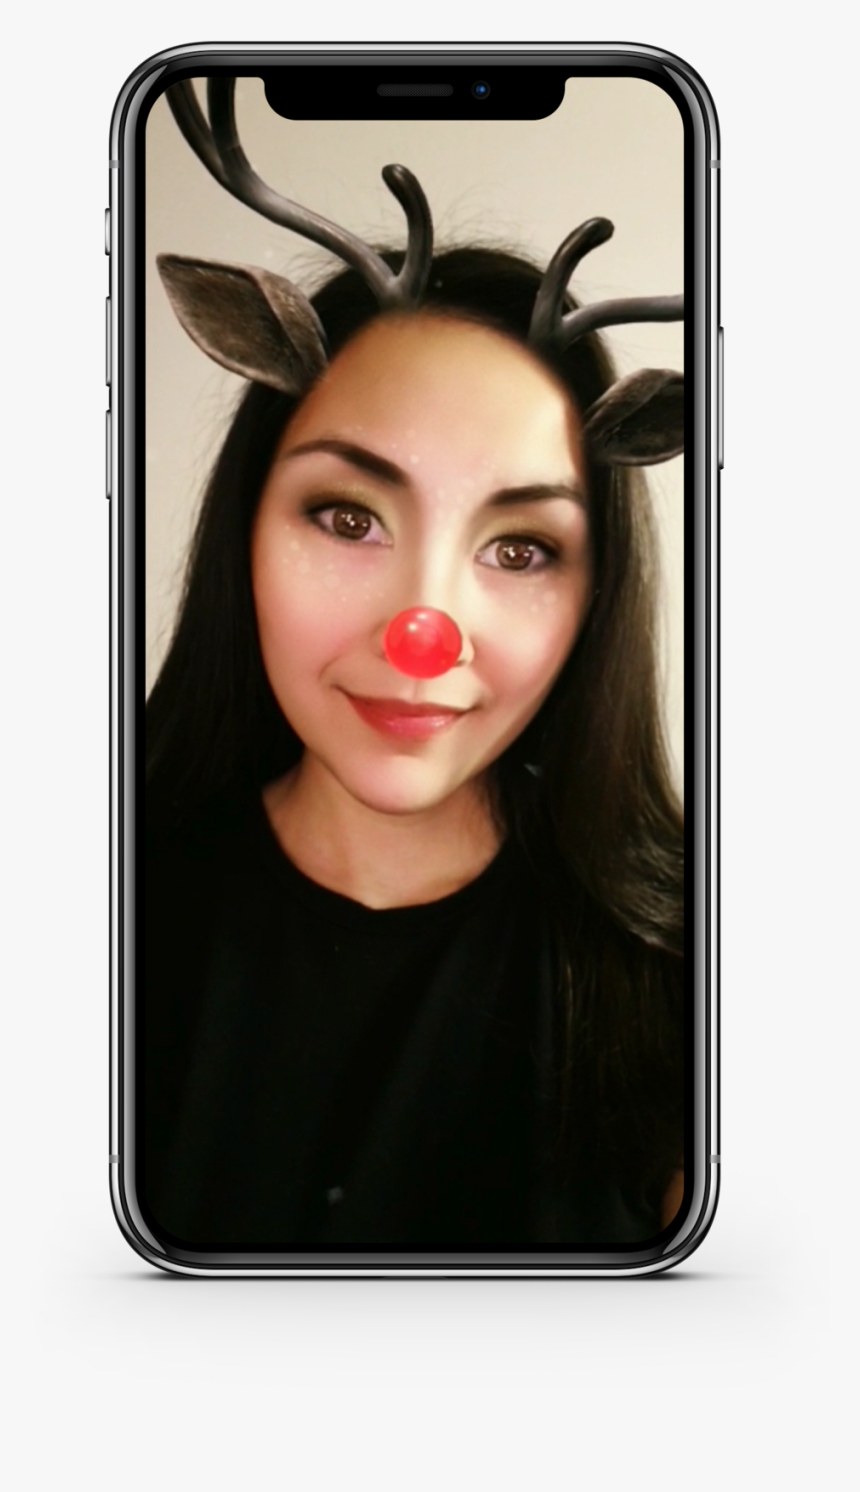 Snapchat Augmentedreality Facelens Joscelynsevier - Iphone, HD Png Download, Free Download